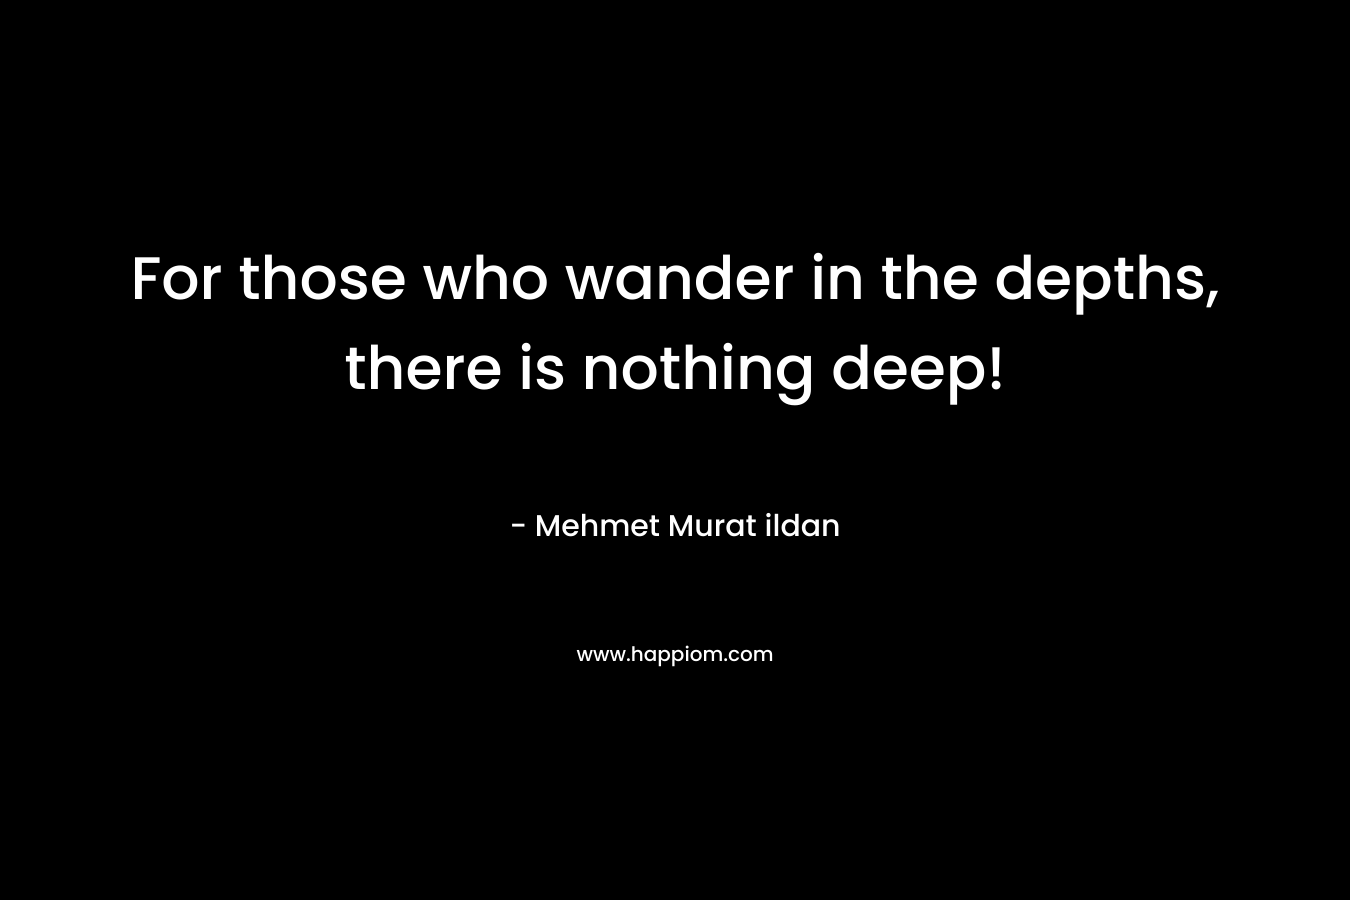 For those who wander in the depths, there is nothing deep! – Mehmet Murat ildan